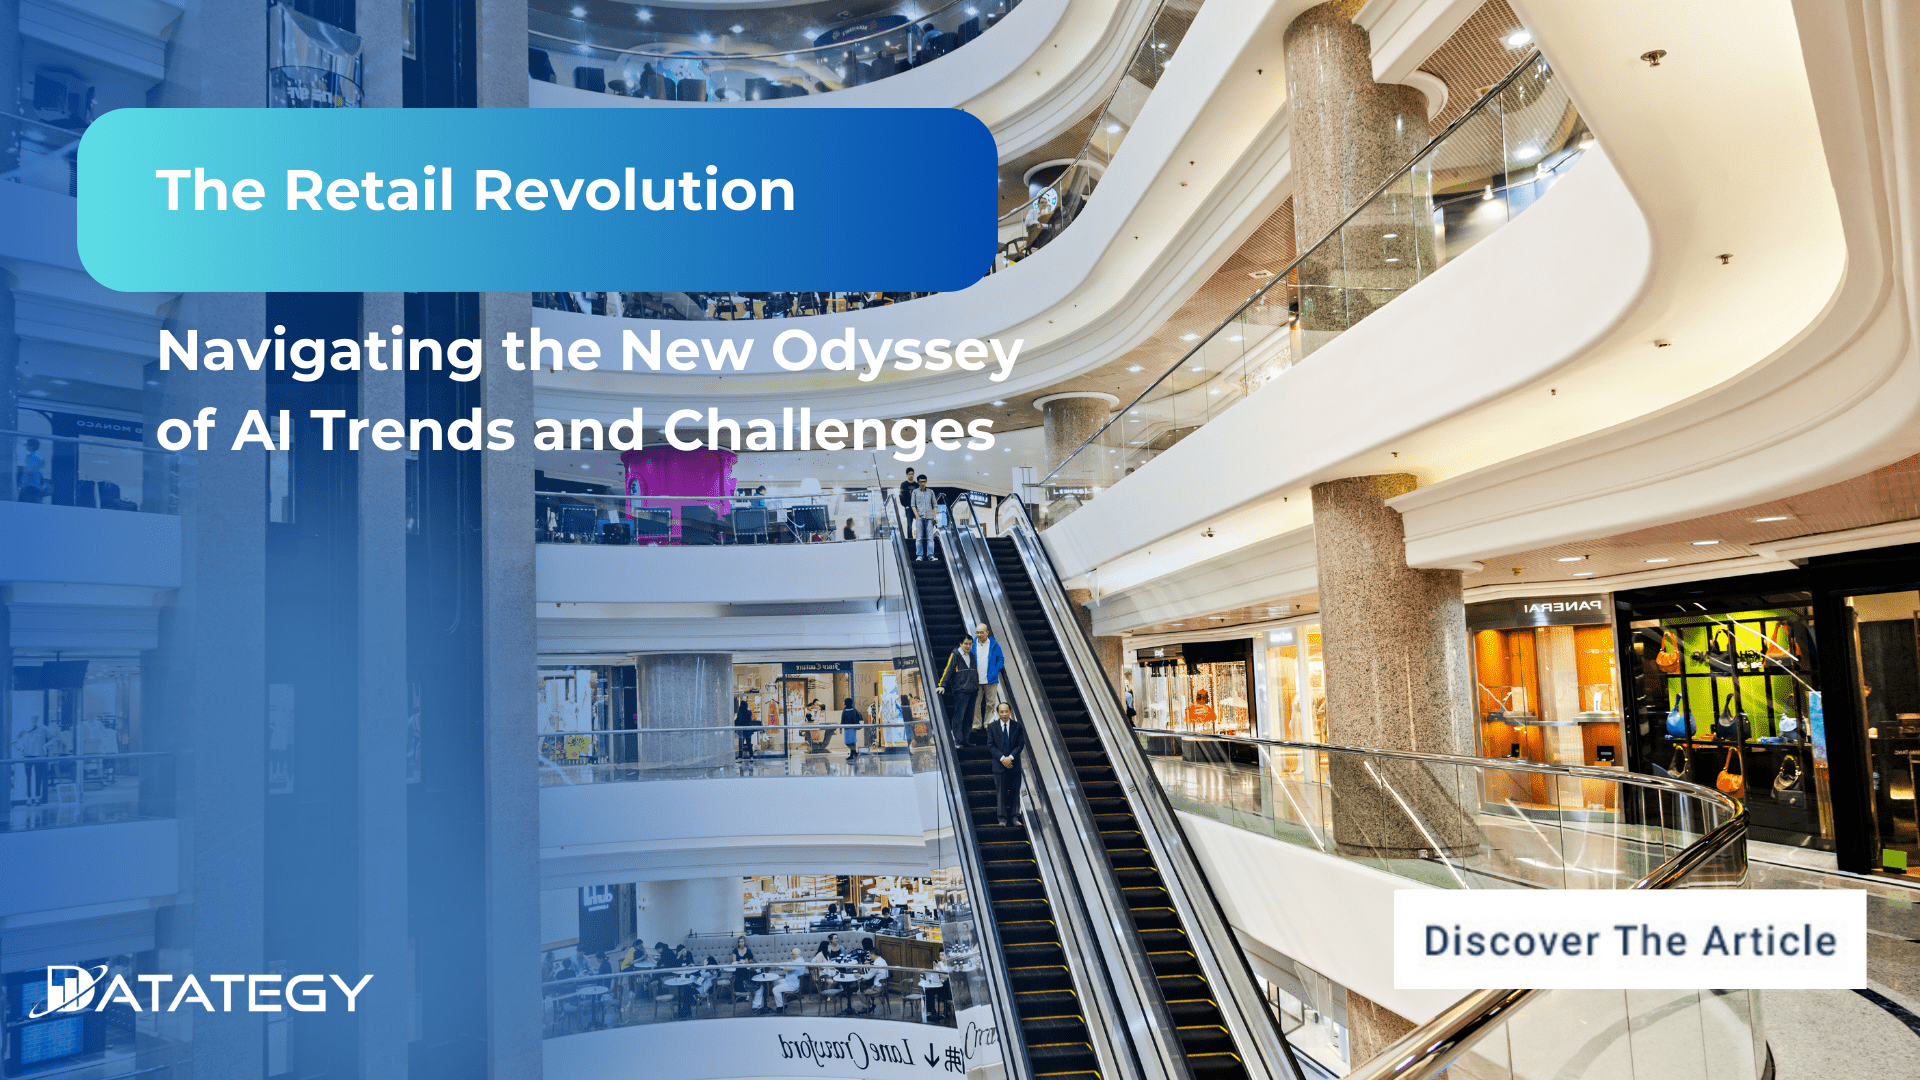 The Retail Revolution: Navigating the New Odyssey of AI Trends and Challenges